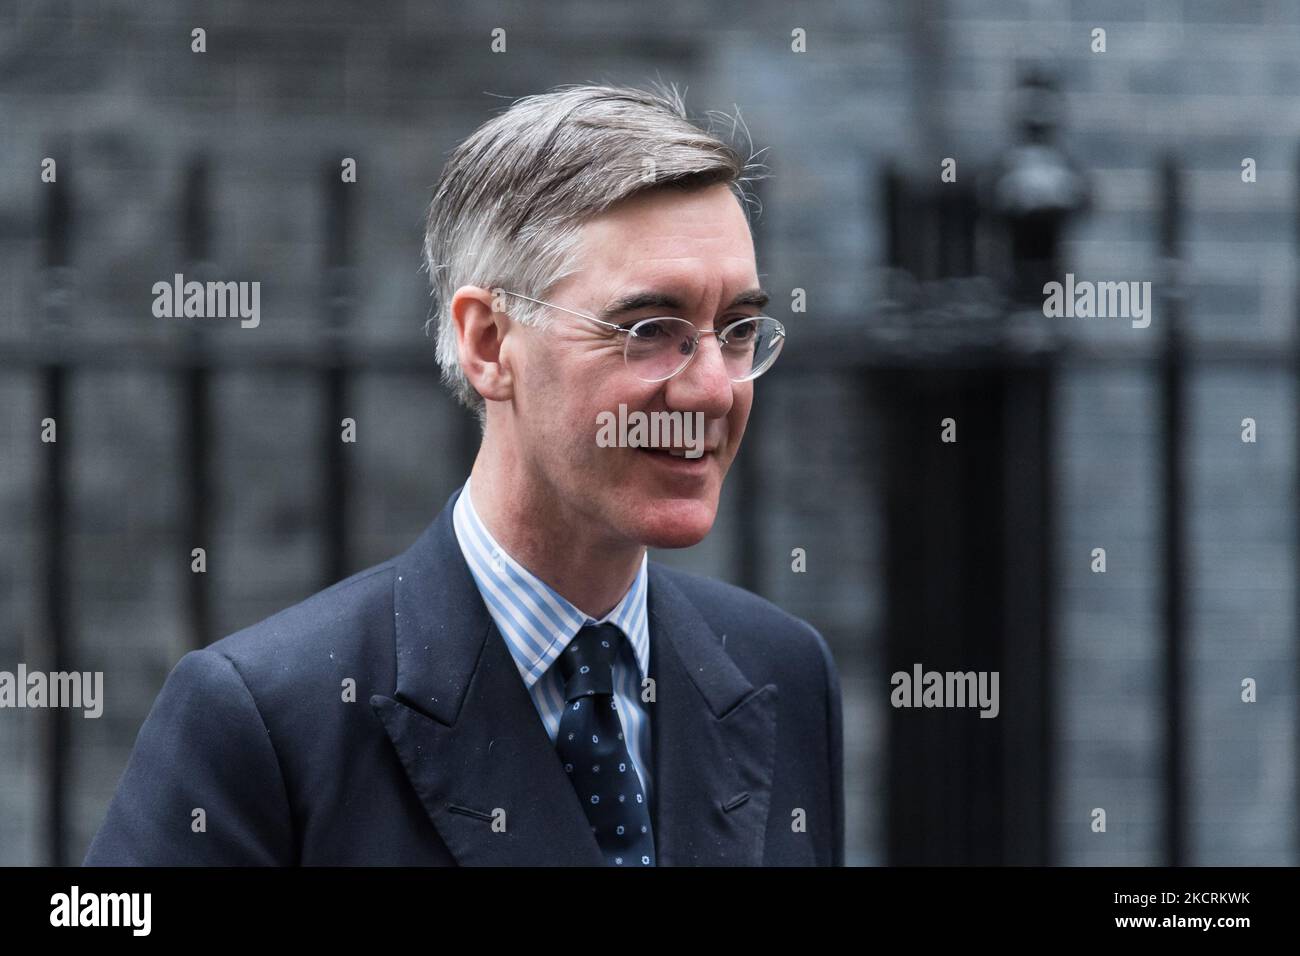 LONDON, UNITED KINGDOM - OCTOBER 27, 2021: Lord President of the Council and Leader of the House of Commons Jacob Rees-Mogg leaves Downing Street in central London after attending the weekly Cabinet meeting on October 27, 2021 in London, England. Today, Chancellor Rishi Sunak is due to announce his Autumn budget and spending review in the House of Commons. (Photo by WIktor Szymanowicz/NurPhoto) Stock Photo